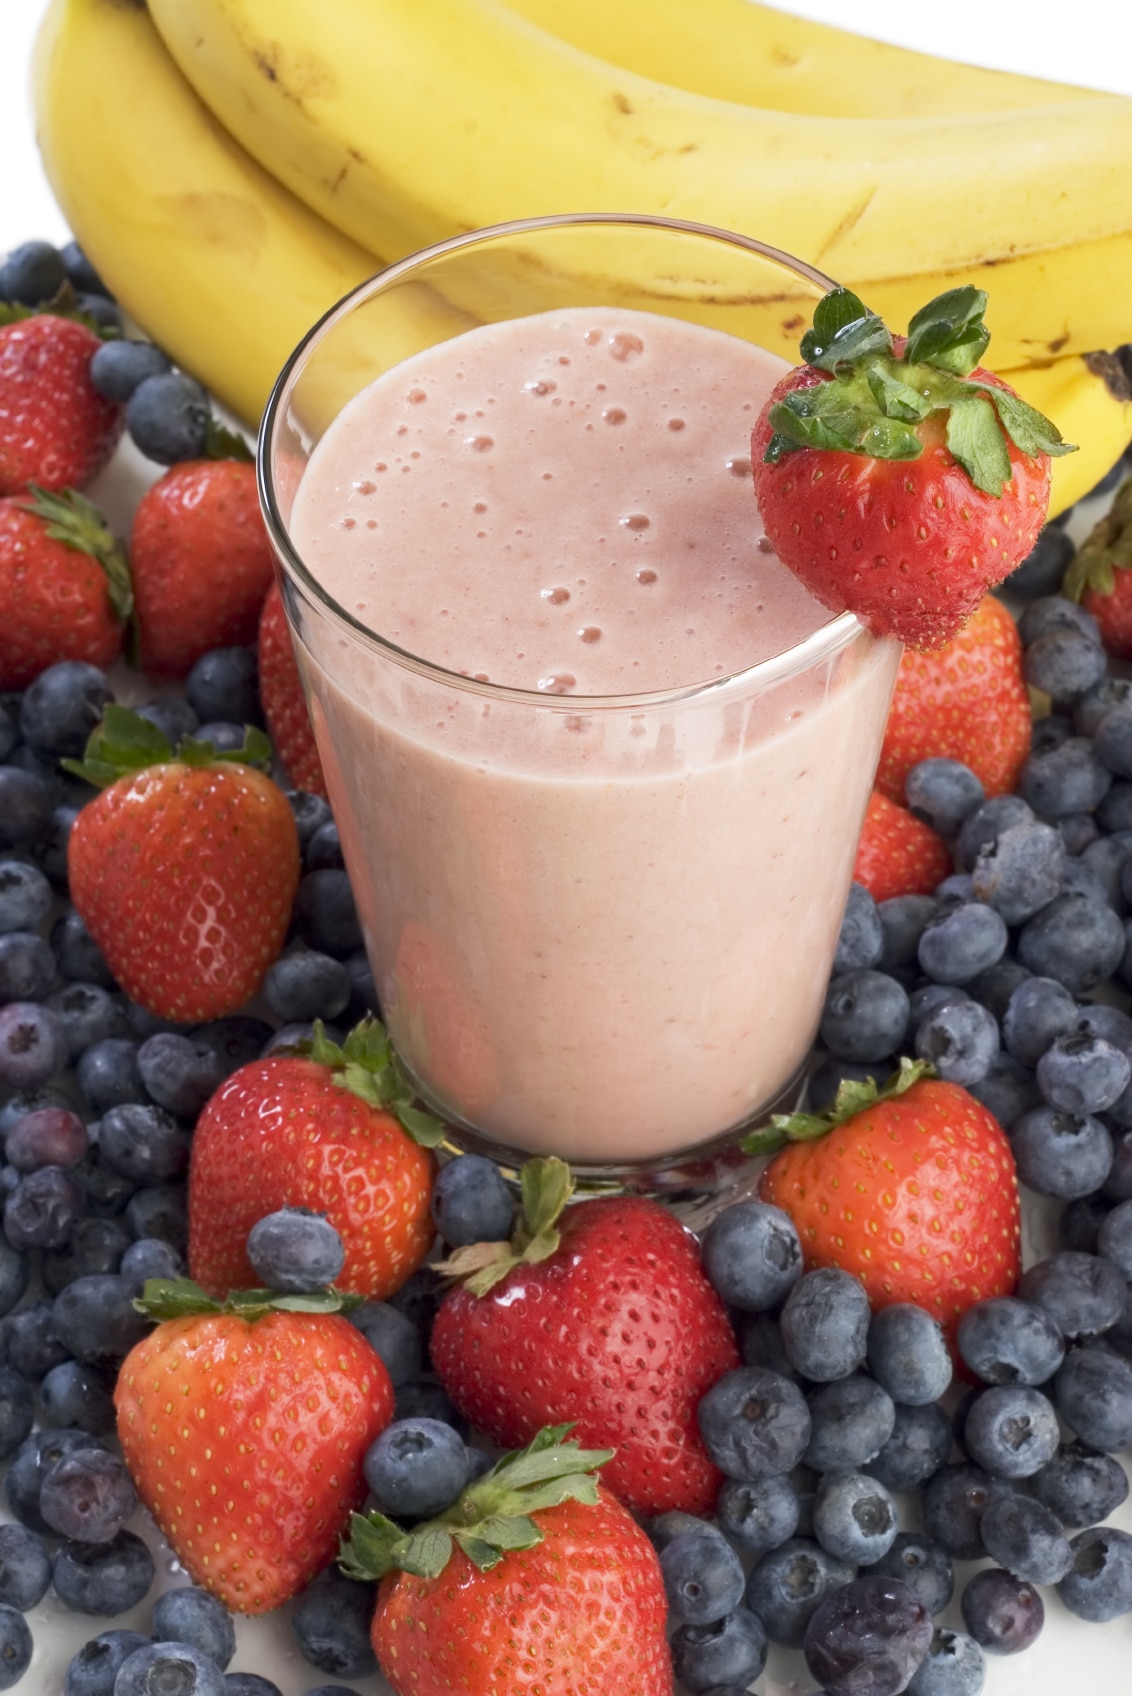 Breakfast Smoothies That Won't Spike Your Blood Sugar